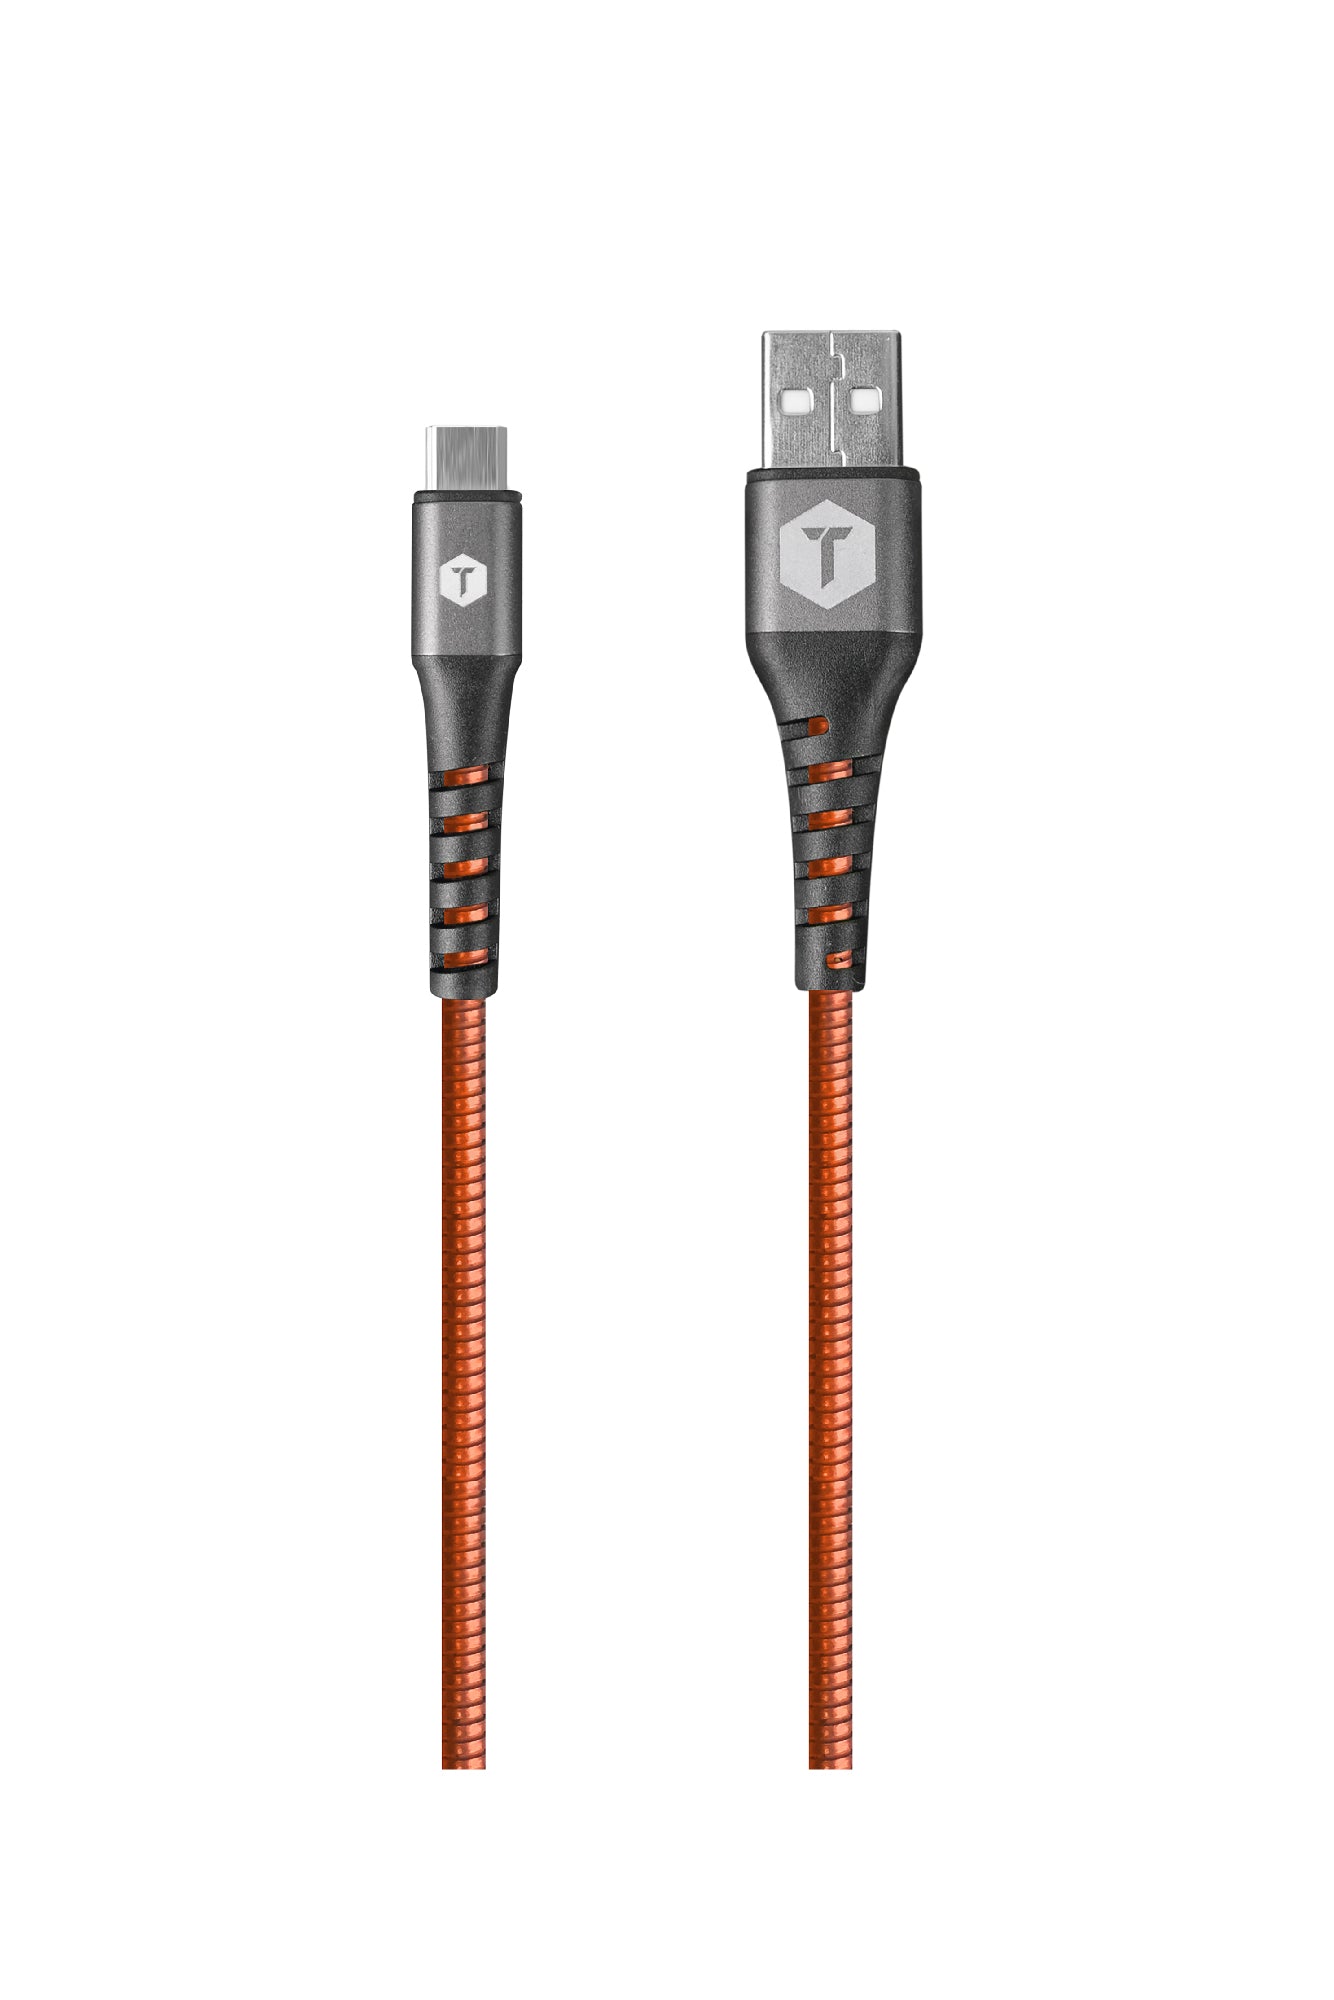 2 Ft. Armor-Flex USB-A to USB-C Cable